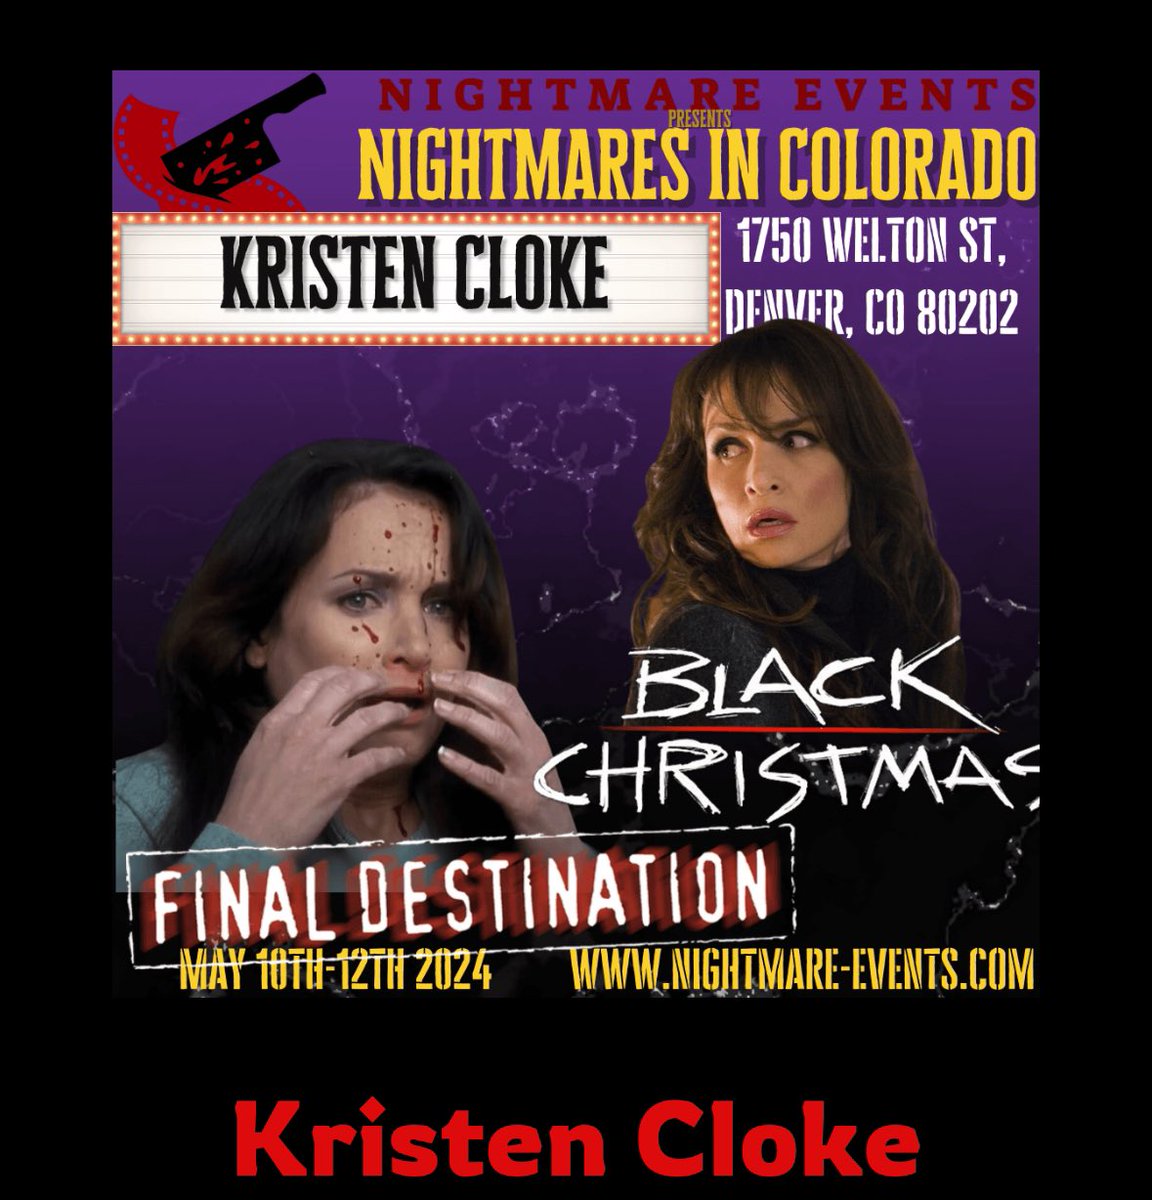 Come join me in Denver! May 10-12! We can sing “Rocky Mountain High” together in person. 😉Can’t wait!  #NightmaresInColorado #FinalDestination